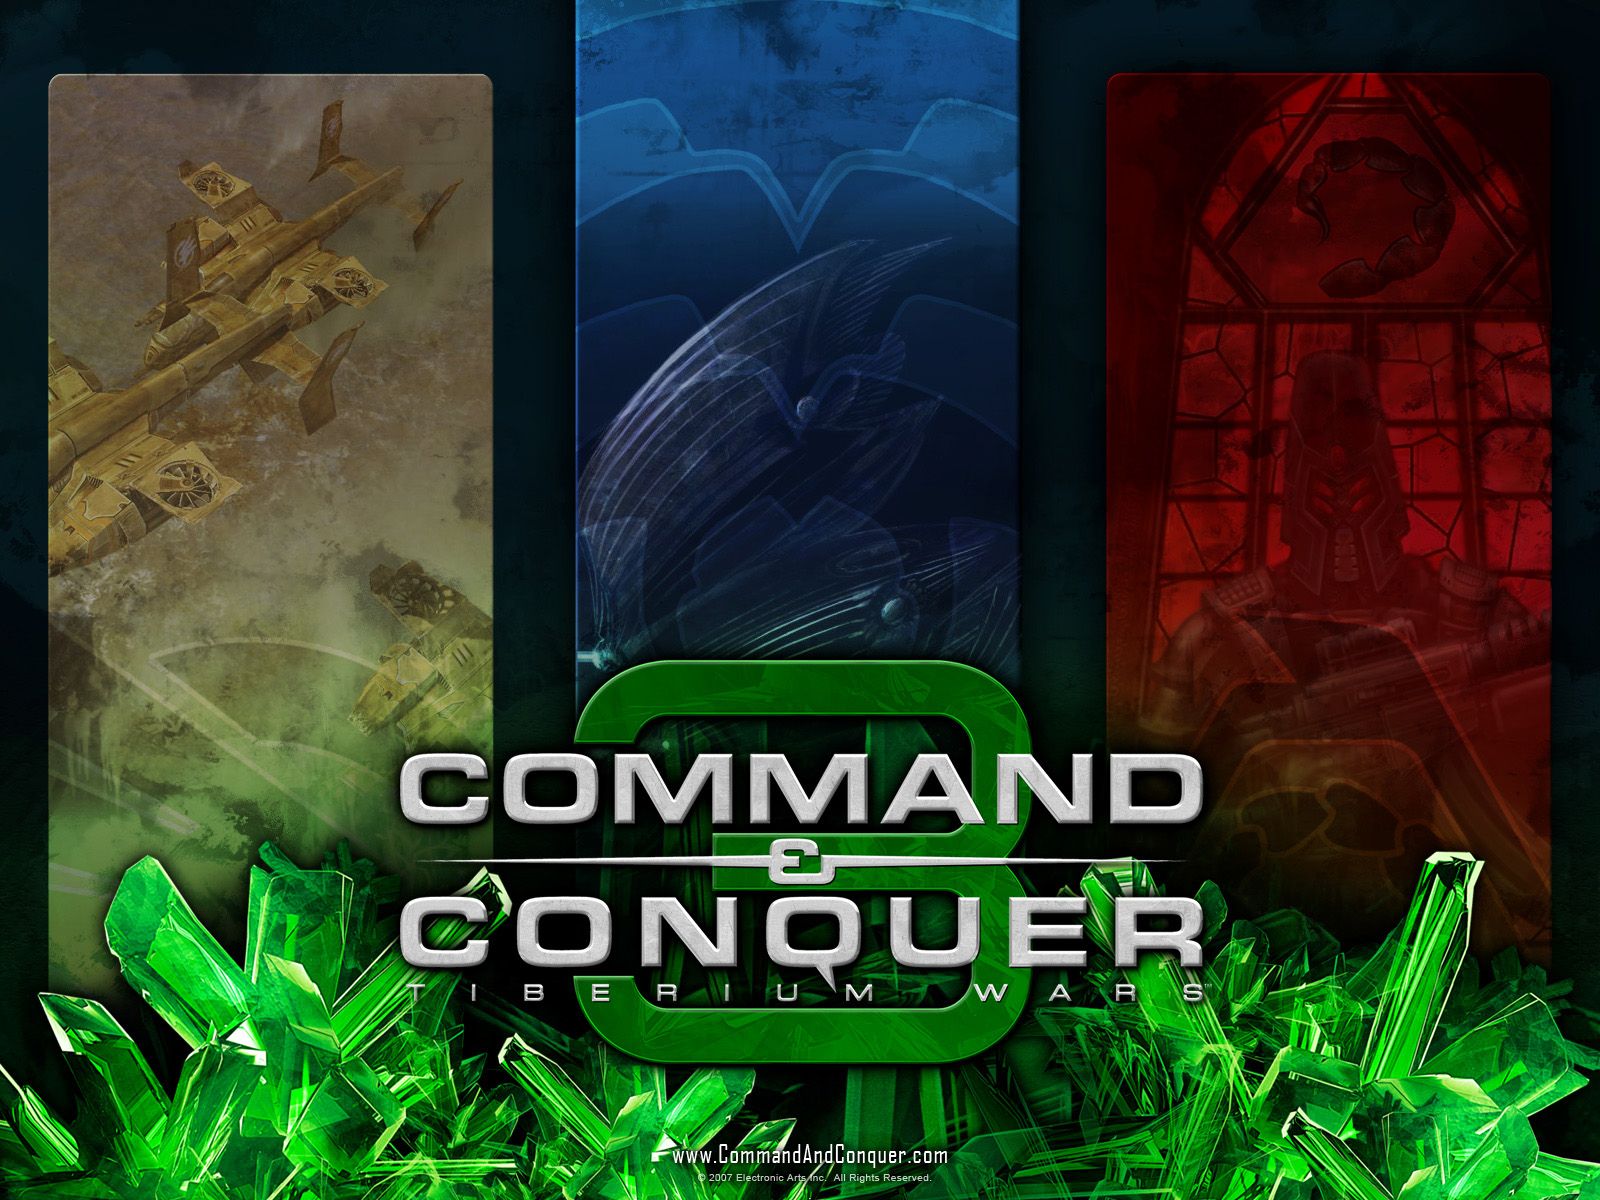 Mand And Conquer